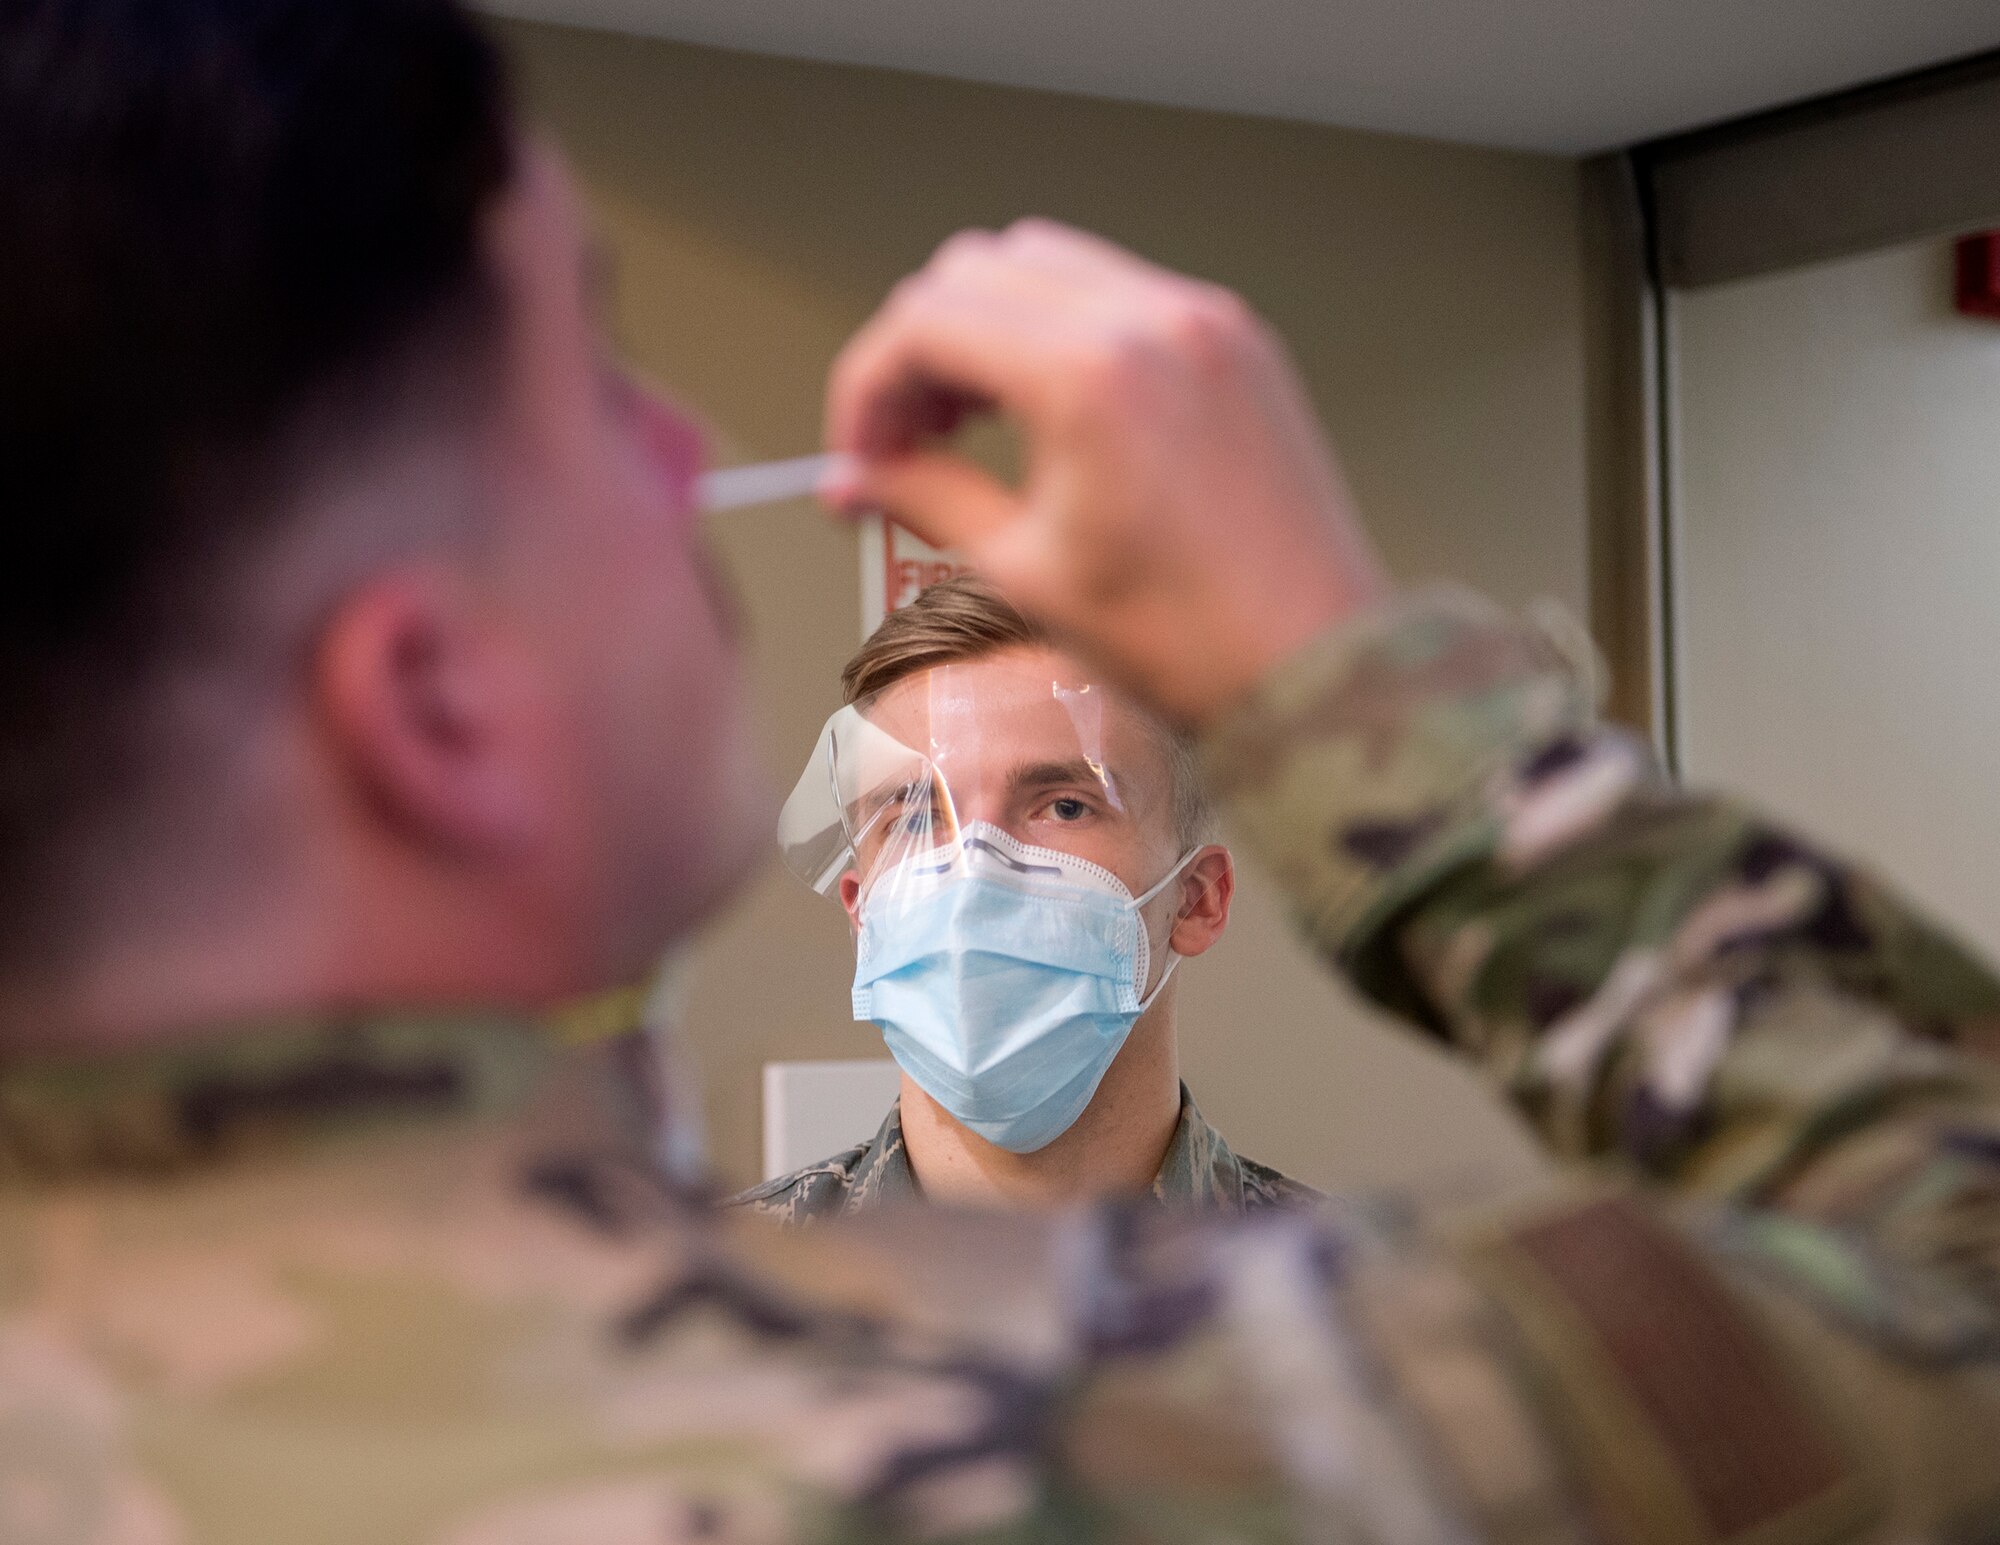 U.S. Air Force Airman from the 133rd Medical Group, oversees the COVID-19 testing in St. Paul, Minn., June 4, 2020.